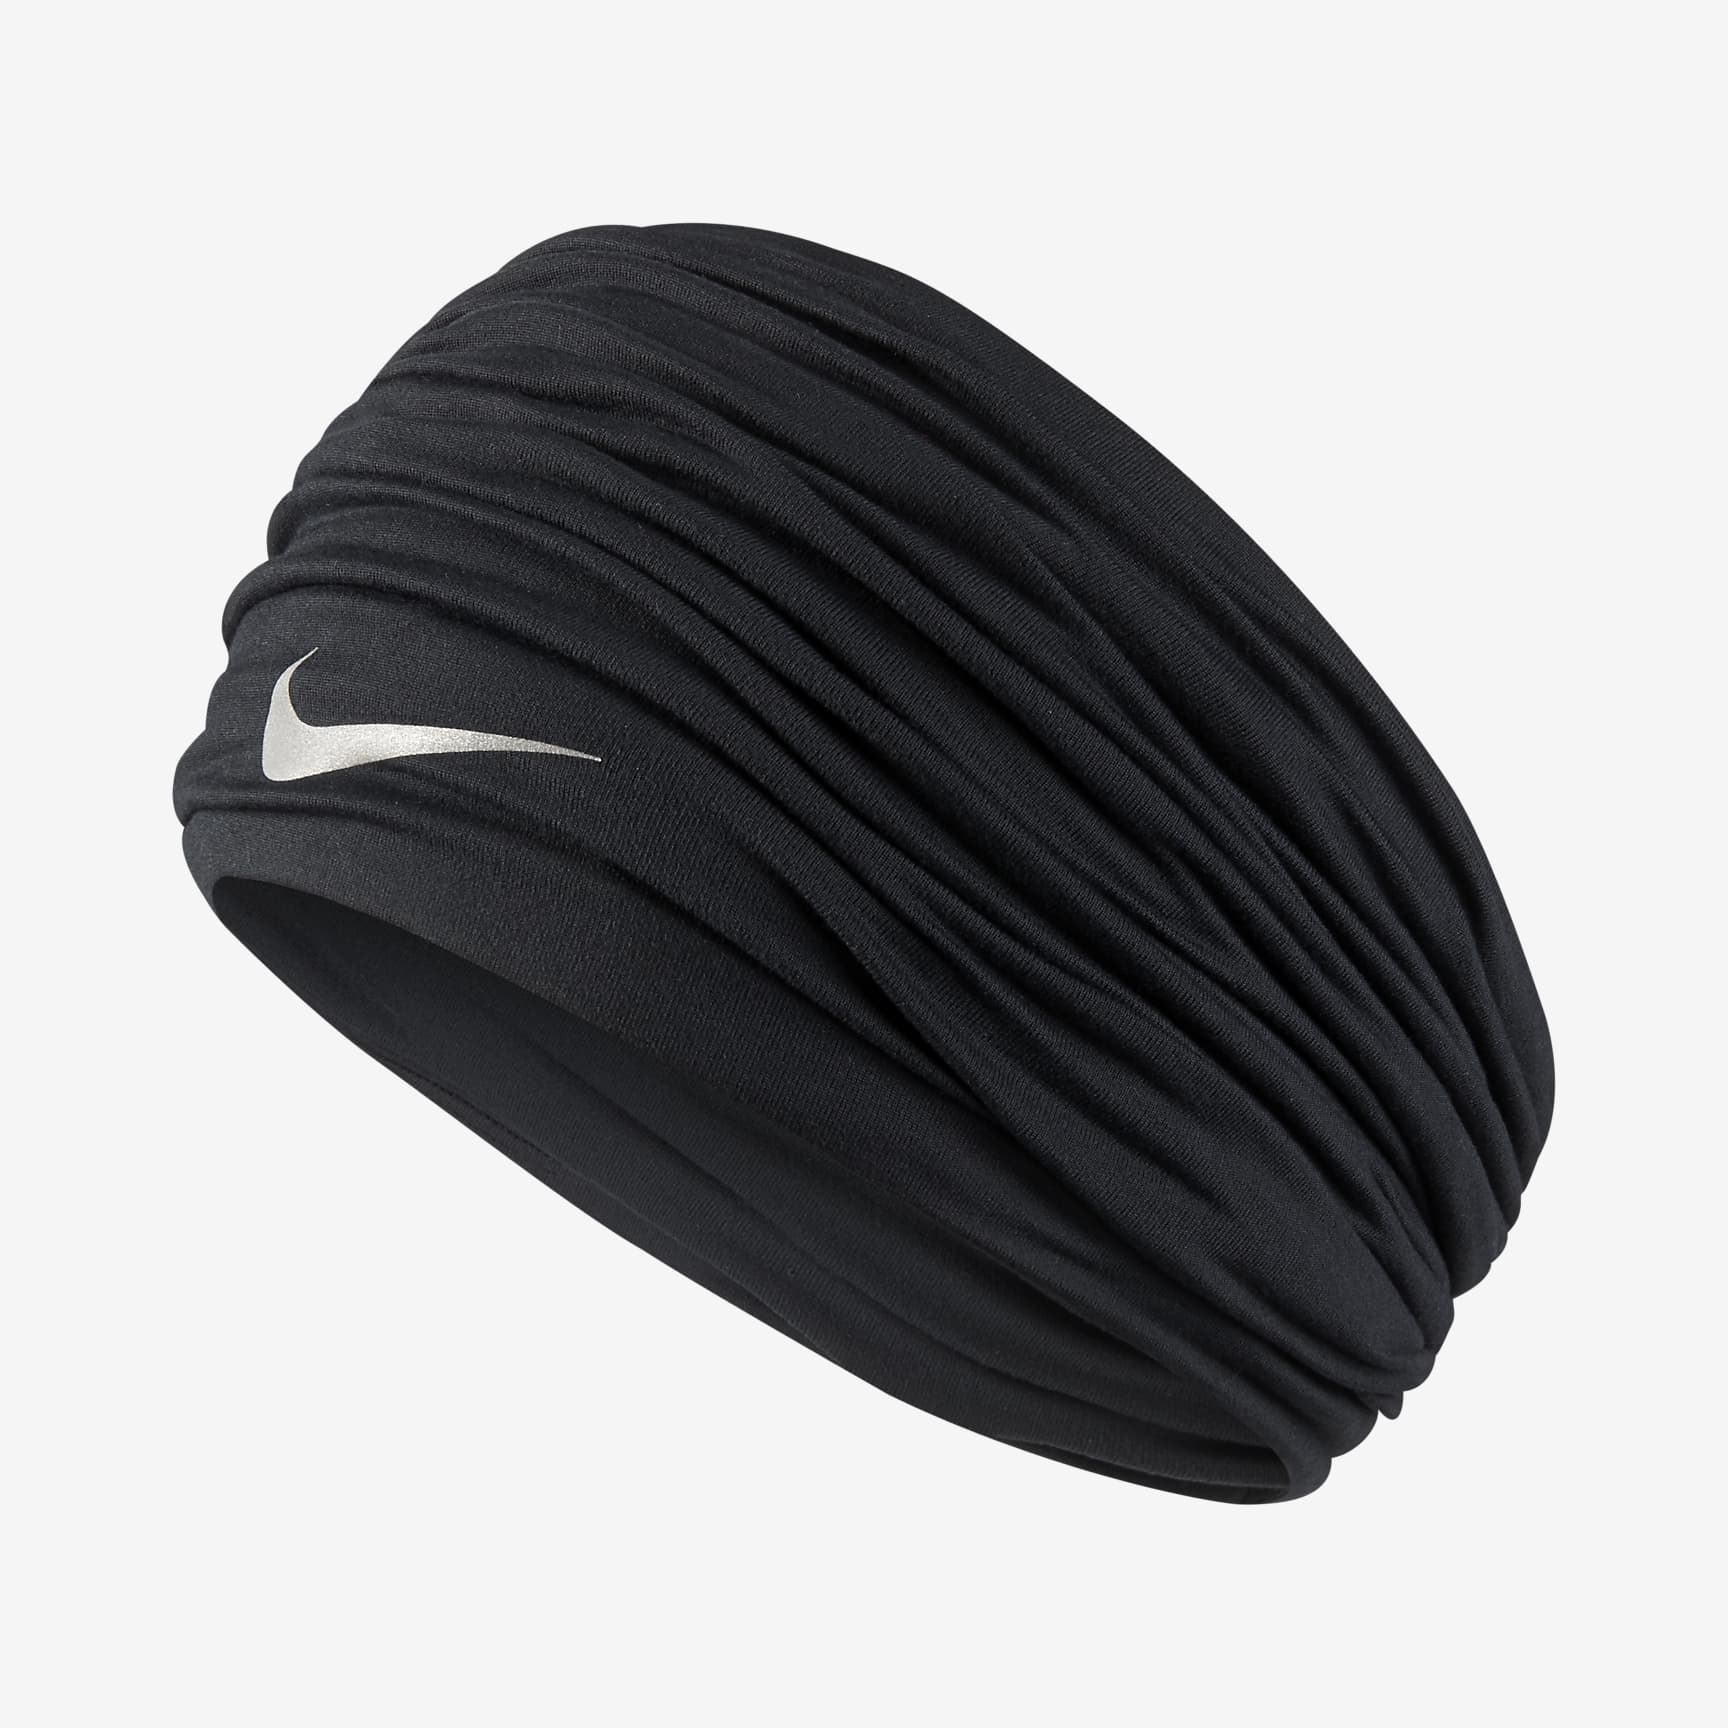 the headband in black with a white nike swoosh